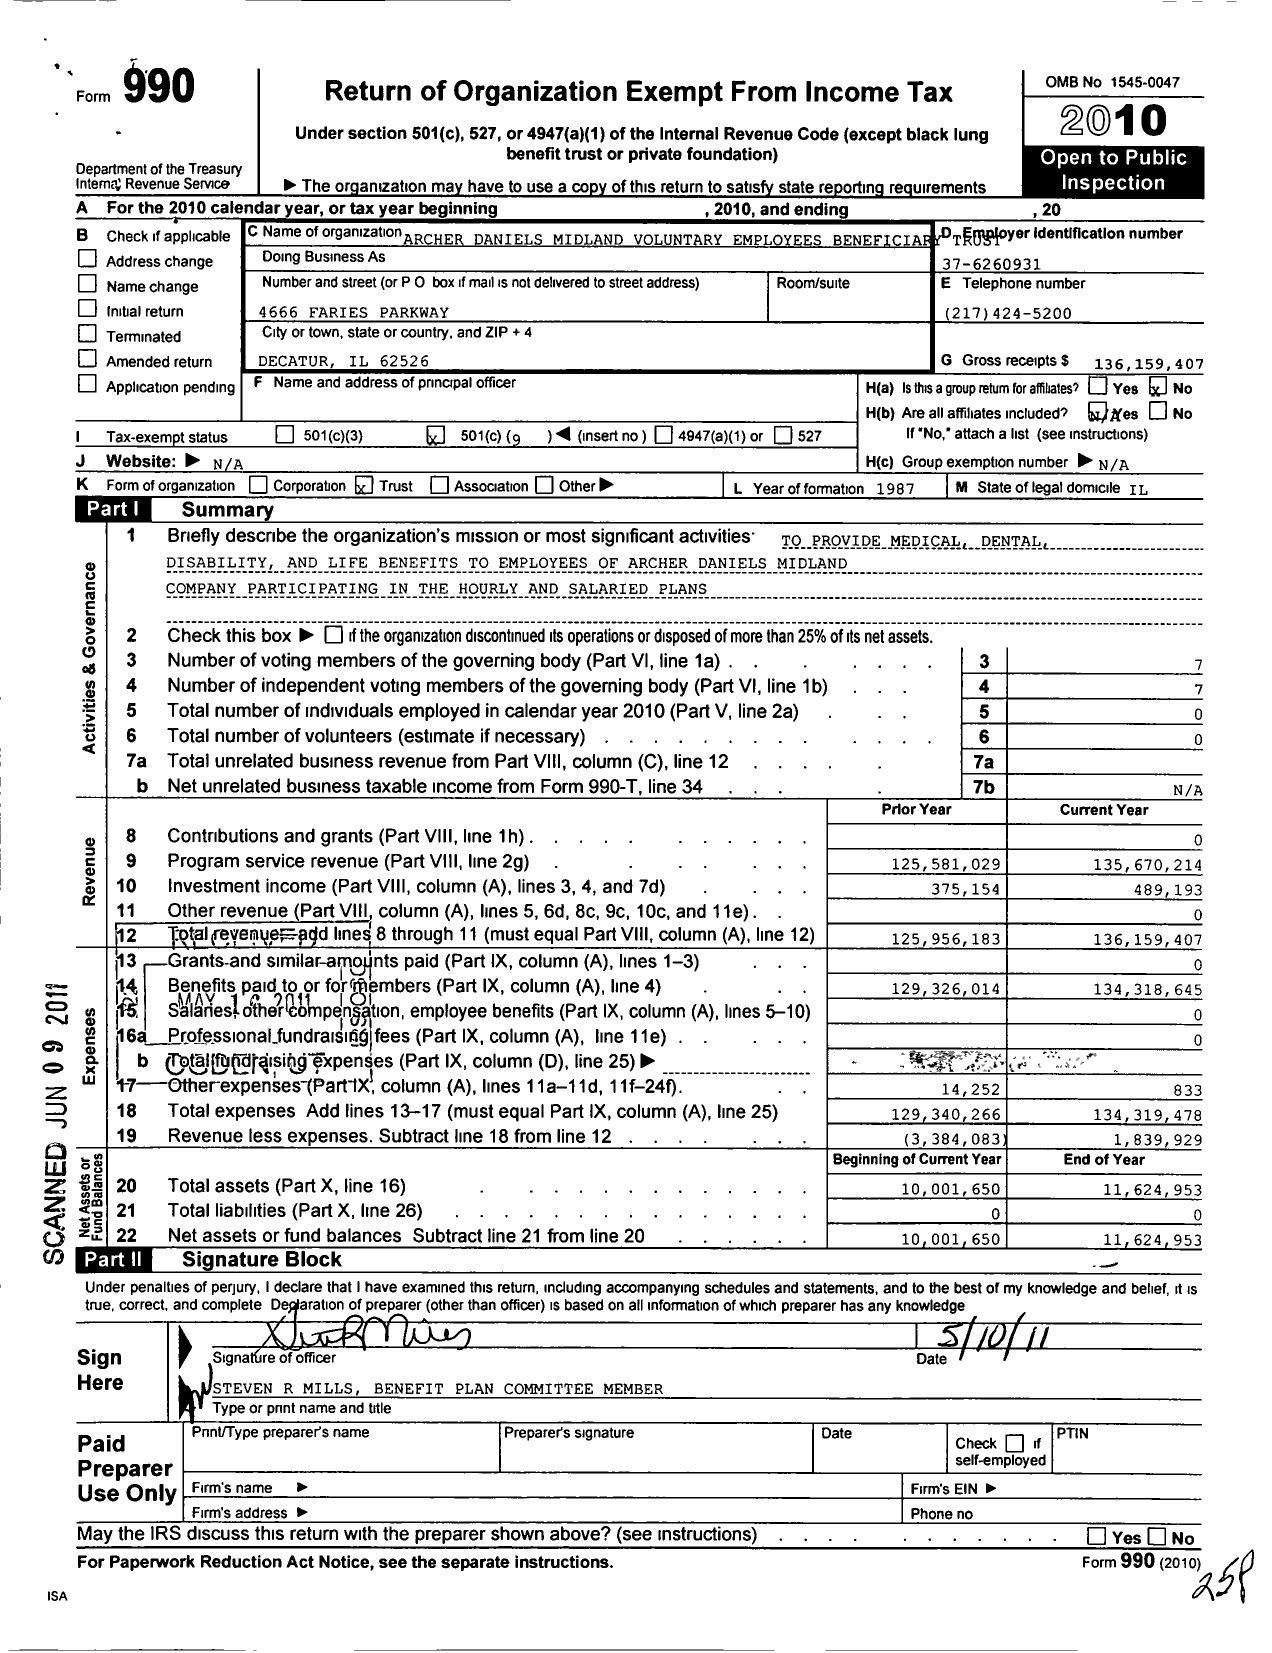 Image of first page of 2010 Form 990O for Archer Daniels Midland Voluntary Employees Beneficiary